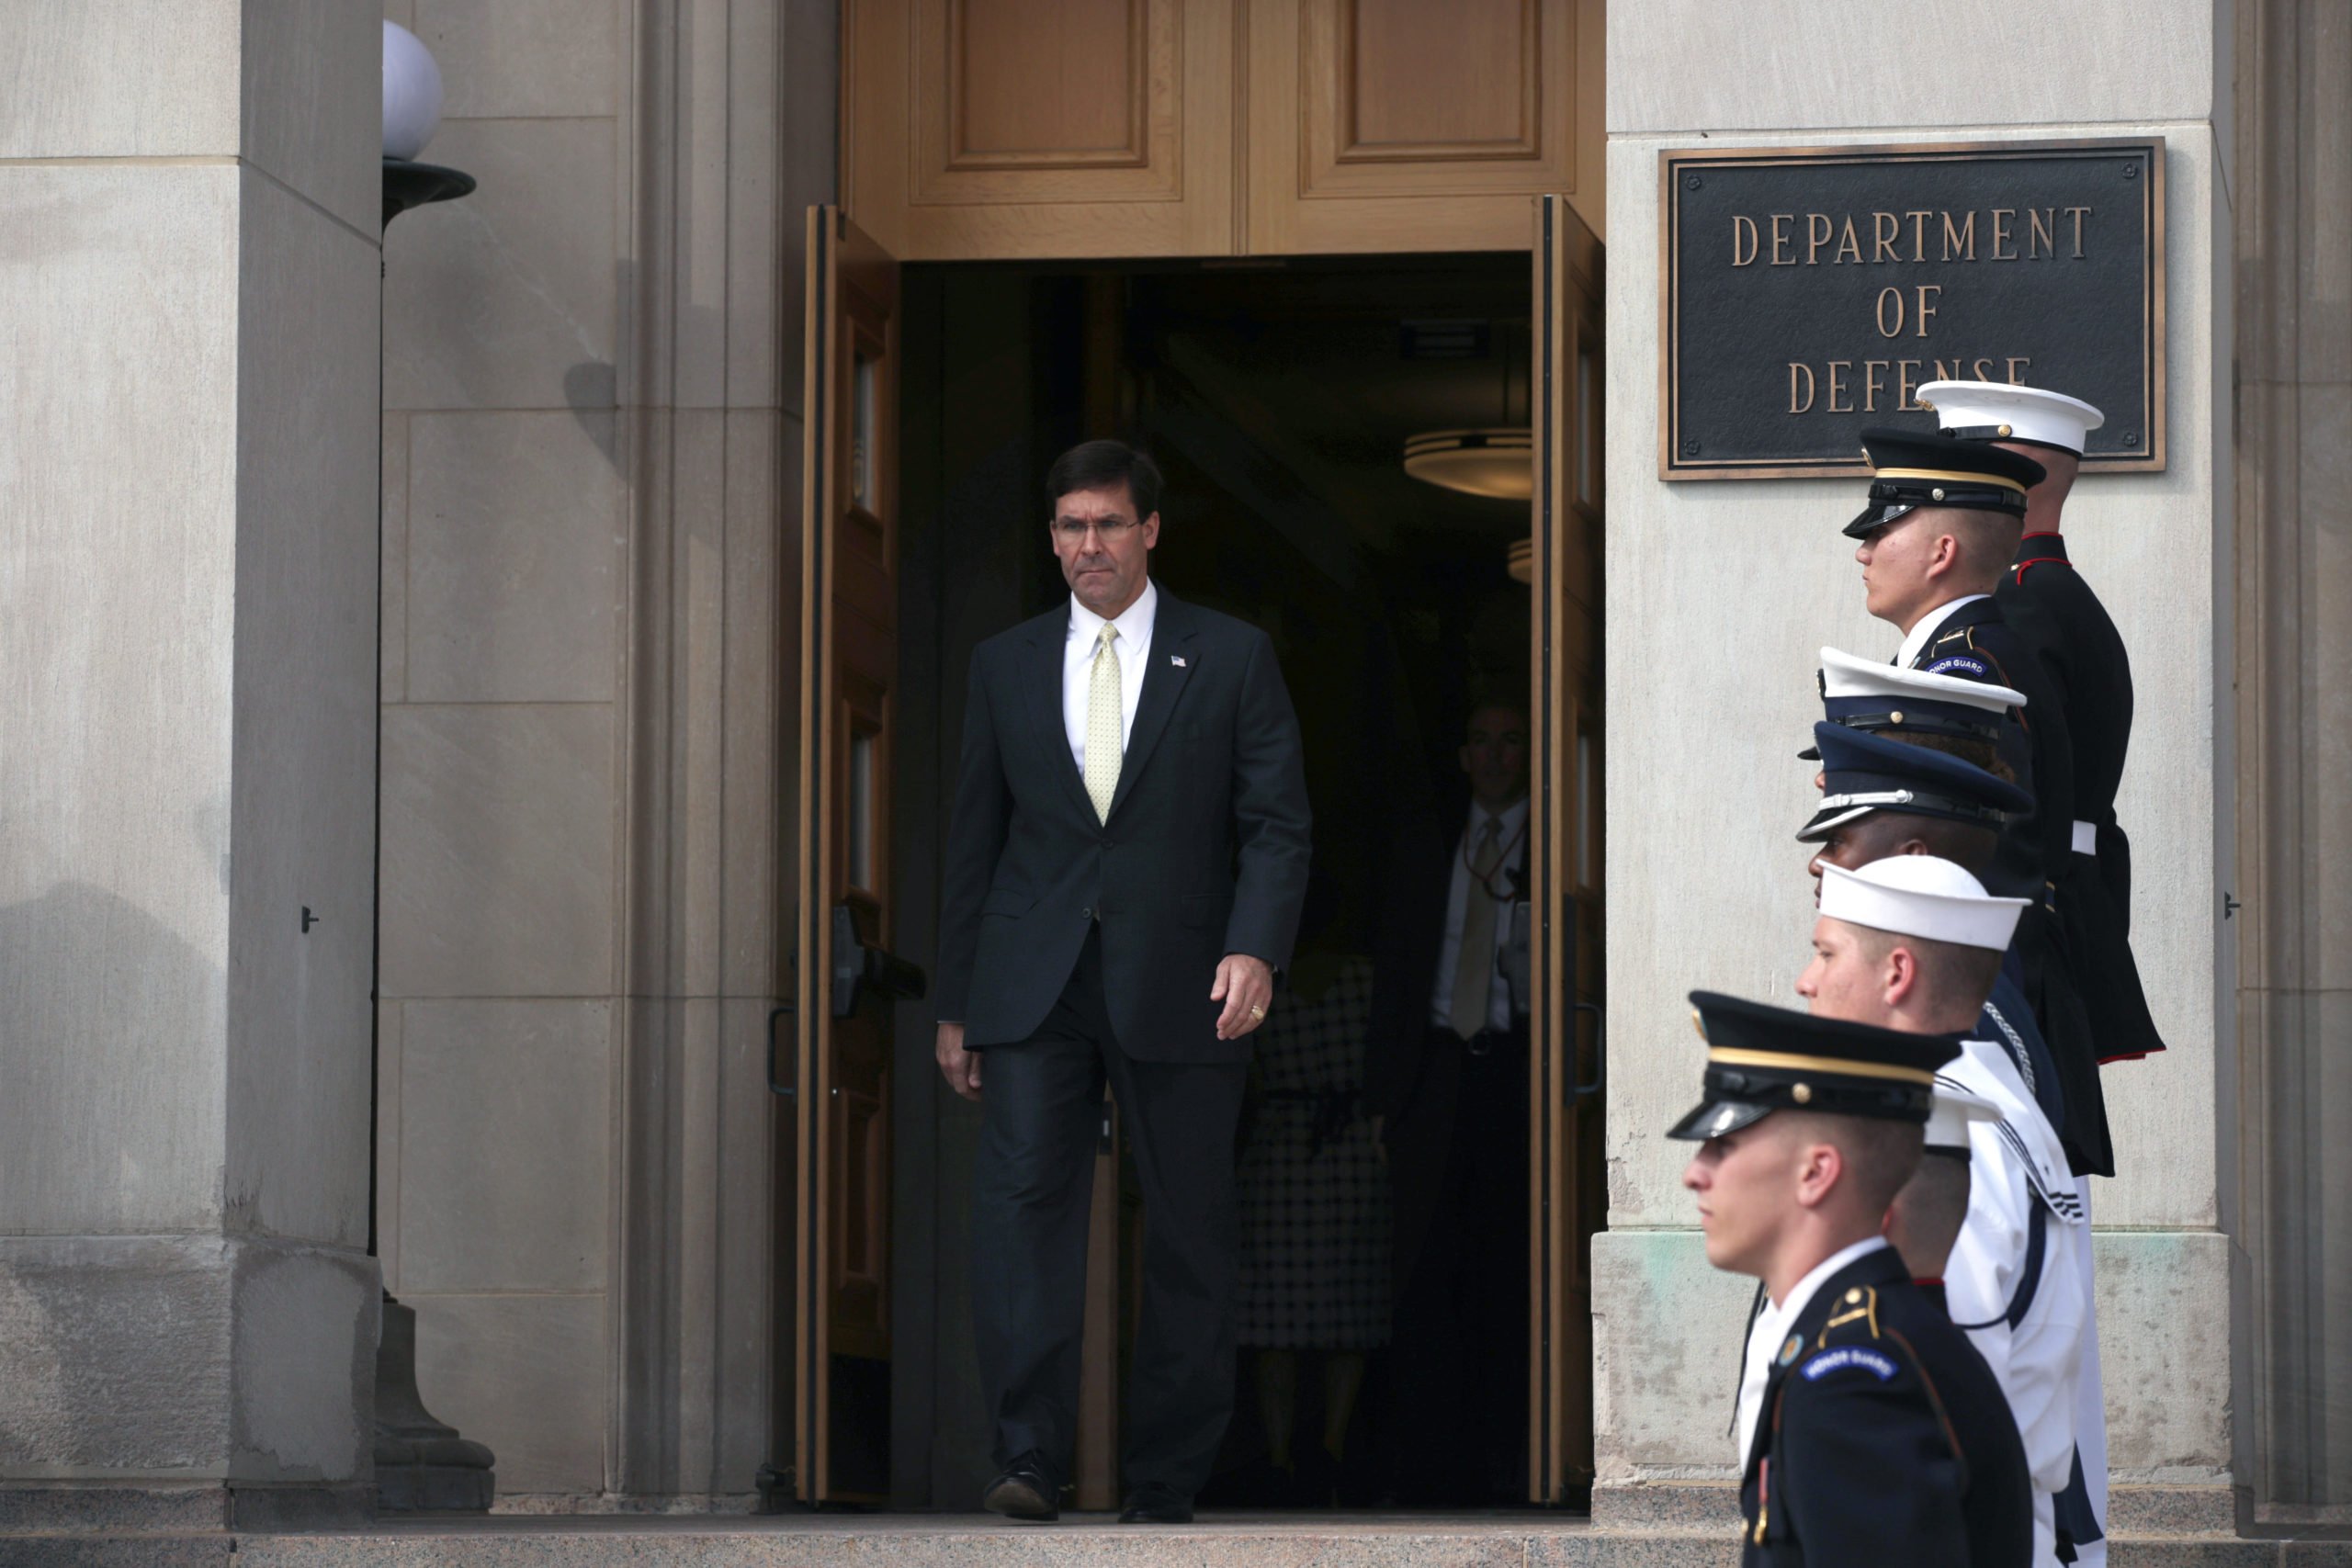 ARLINGTON, VIRGINIA - SEPTEMBER 23: U.S. Secretary of Defense Mark Esper comes out from the building to welcome Germany Defense Minister Annegret Kramp-Karrenbauer during an enhanced honor cordon at the Pentagon September 23, 2019 in Arlington, Virginia. Secretary Esper and Minister Kramp-Karrenbauer had a bilateral meeting during her visit in Washington. (Alex Wong/Getty Images)